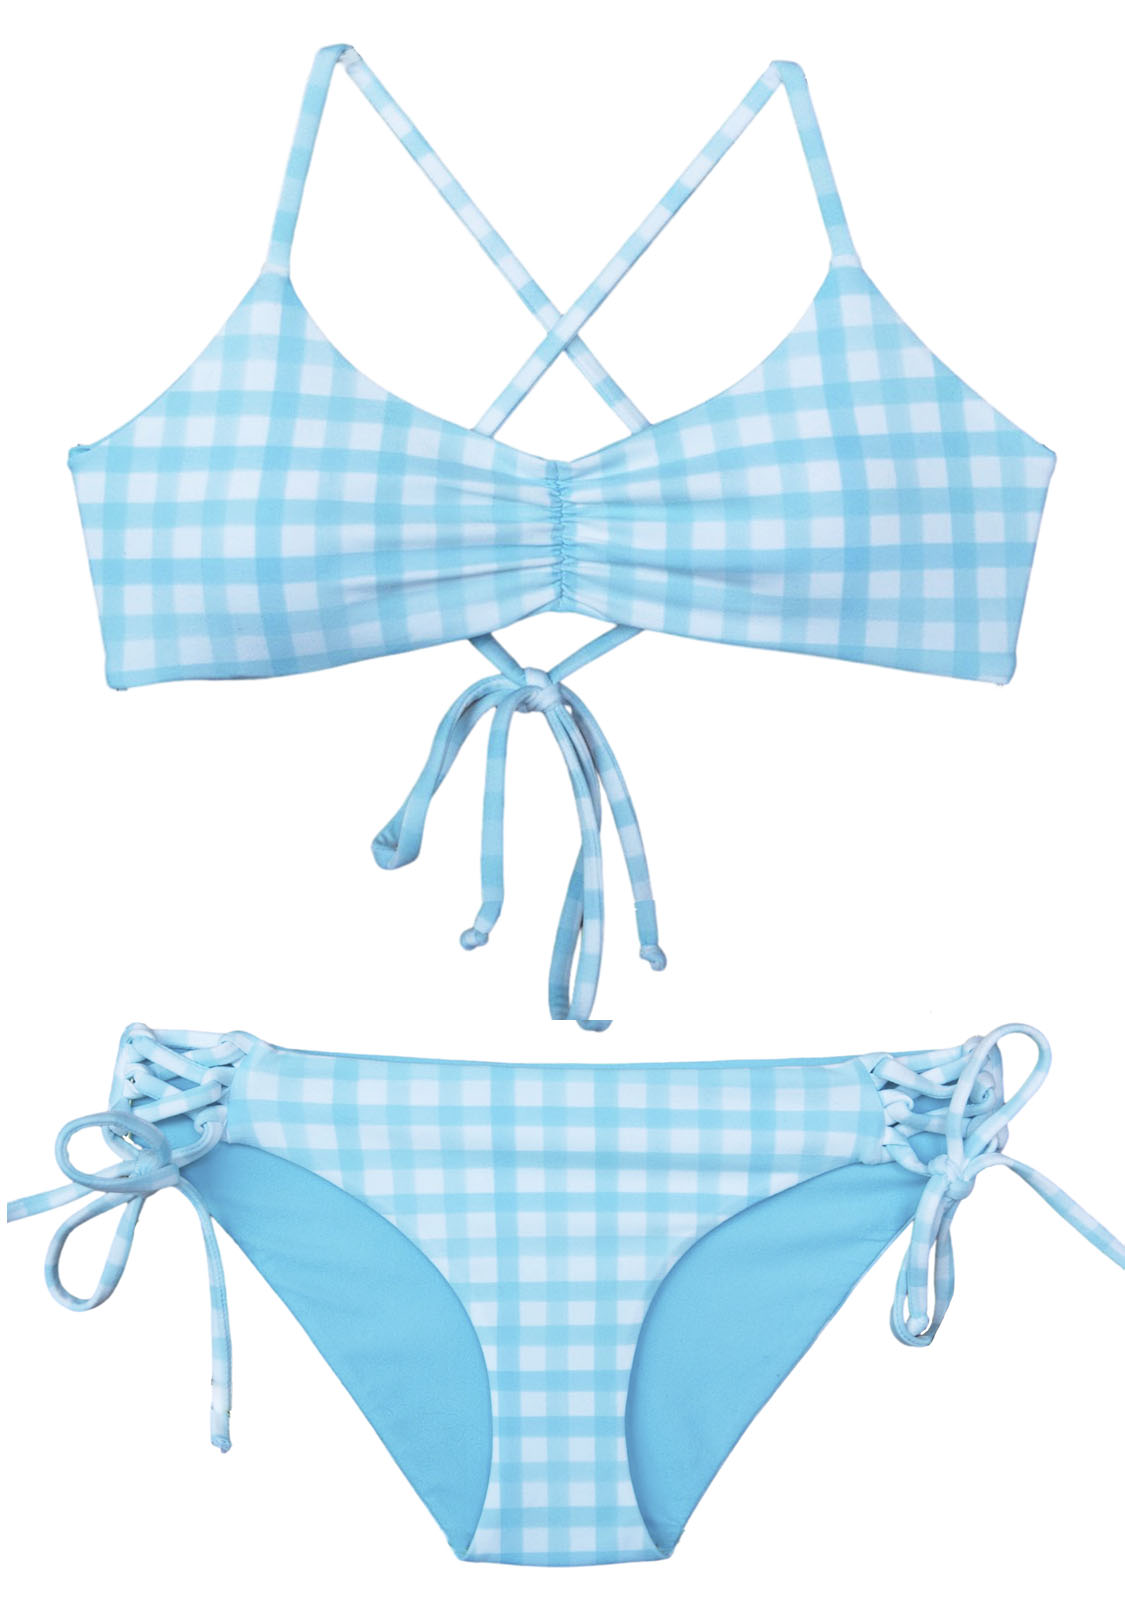 Gingham Blue and white two-piece swimsuit for girls tweens teens juniors